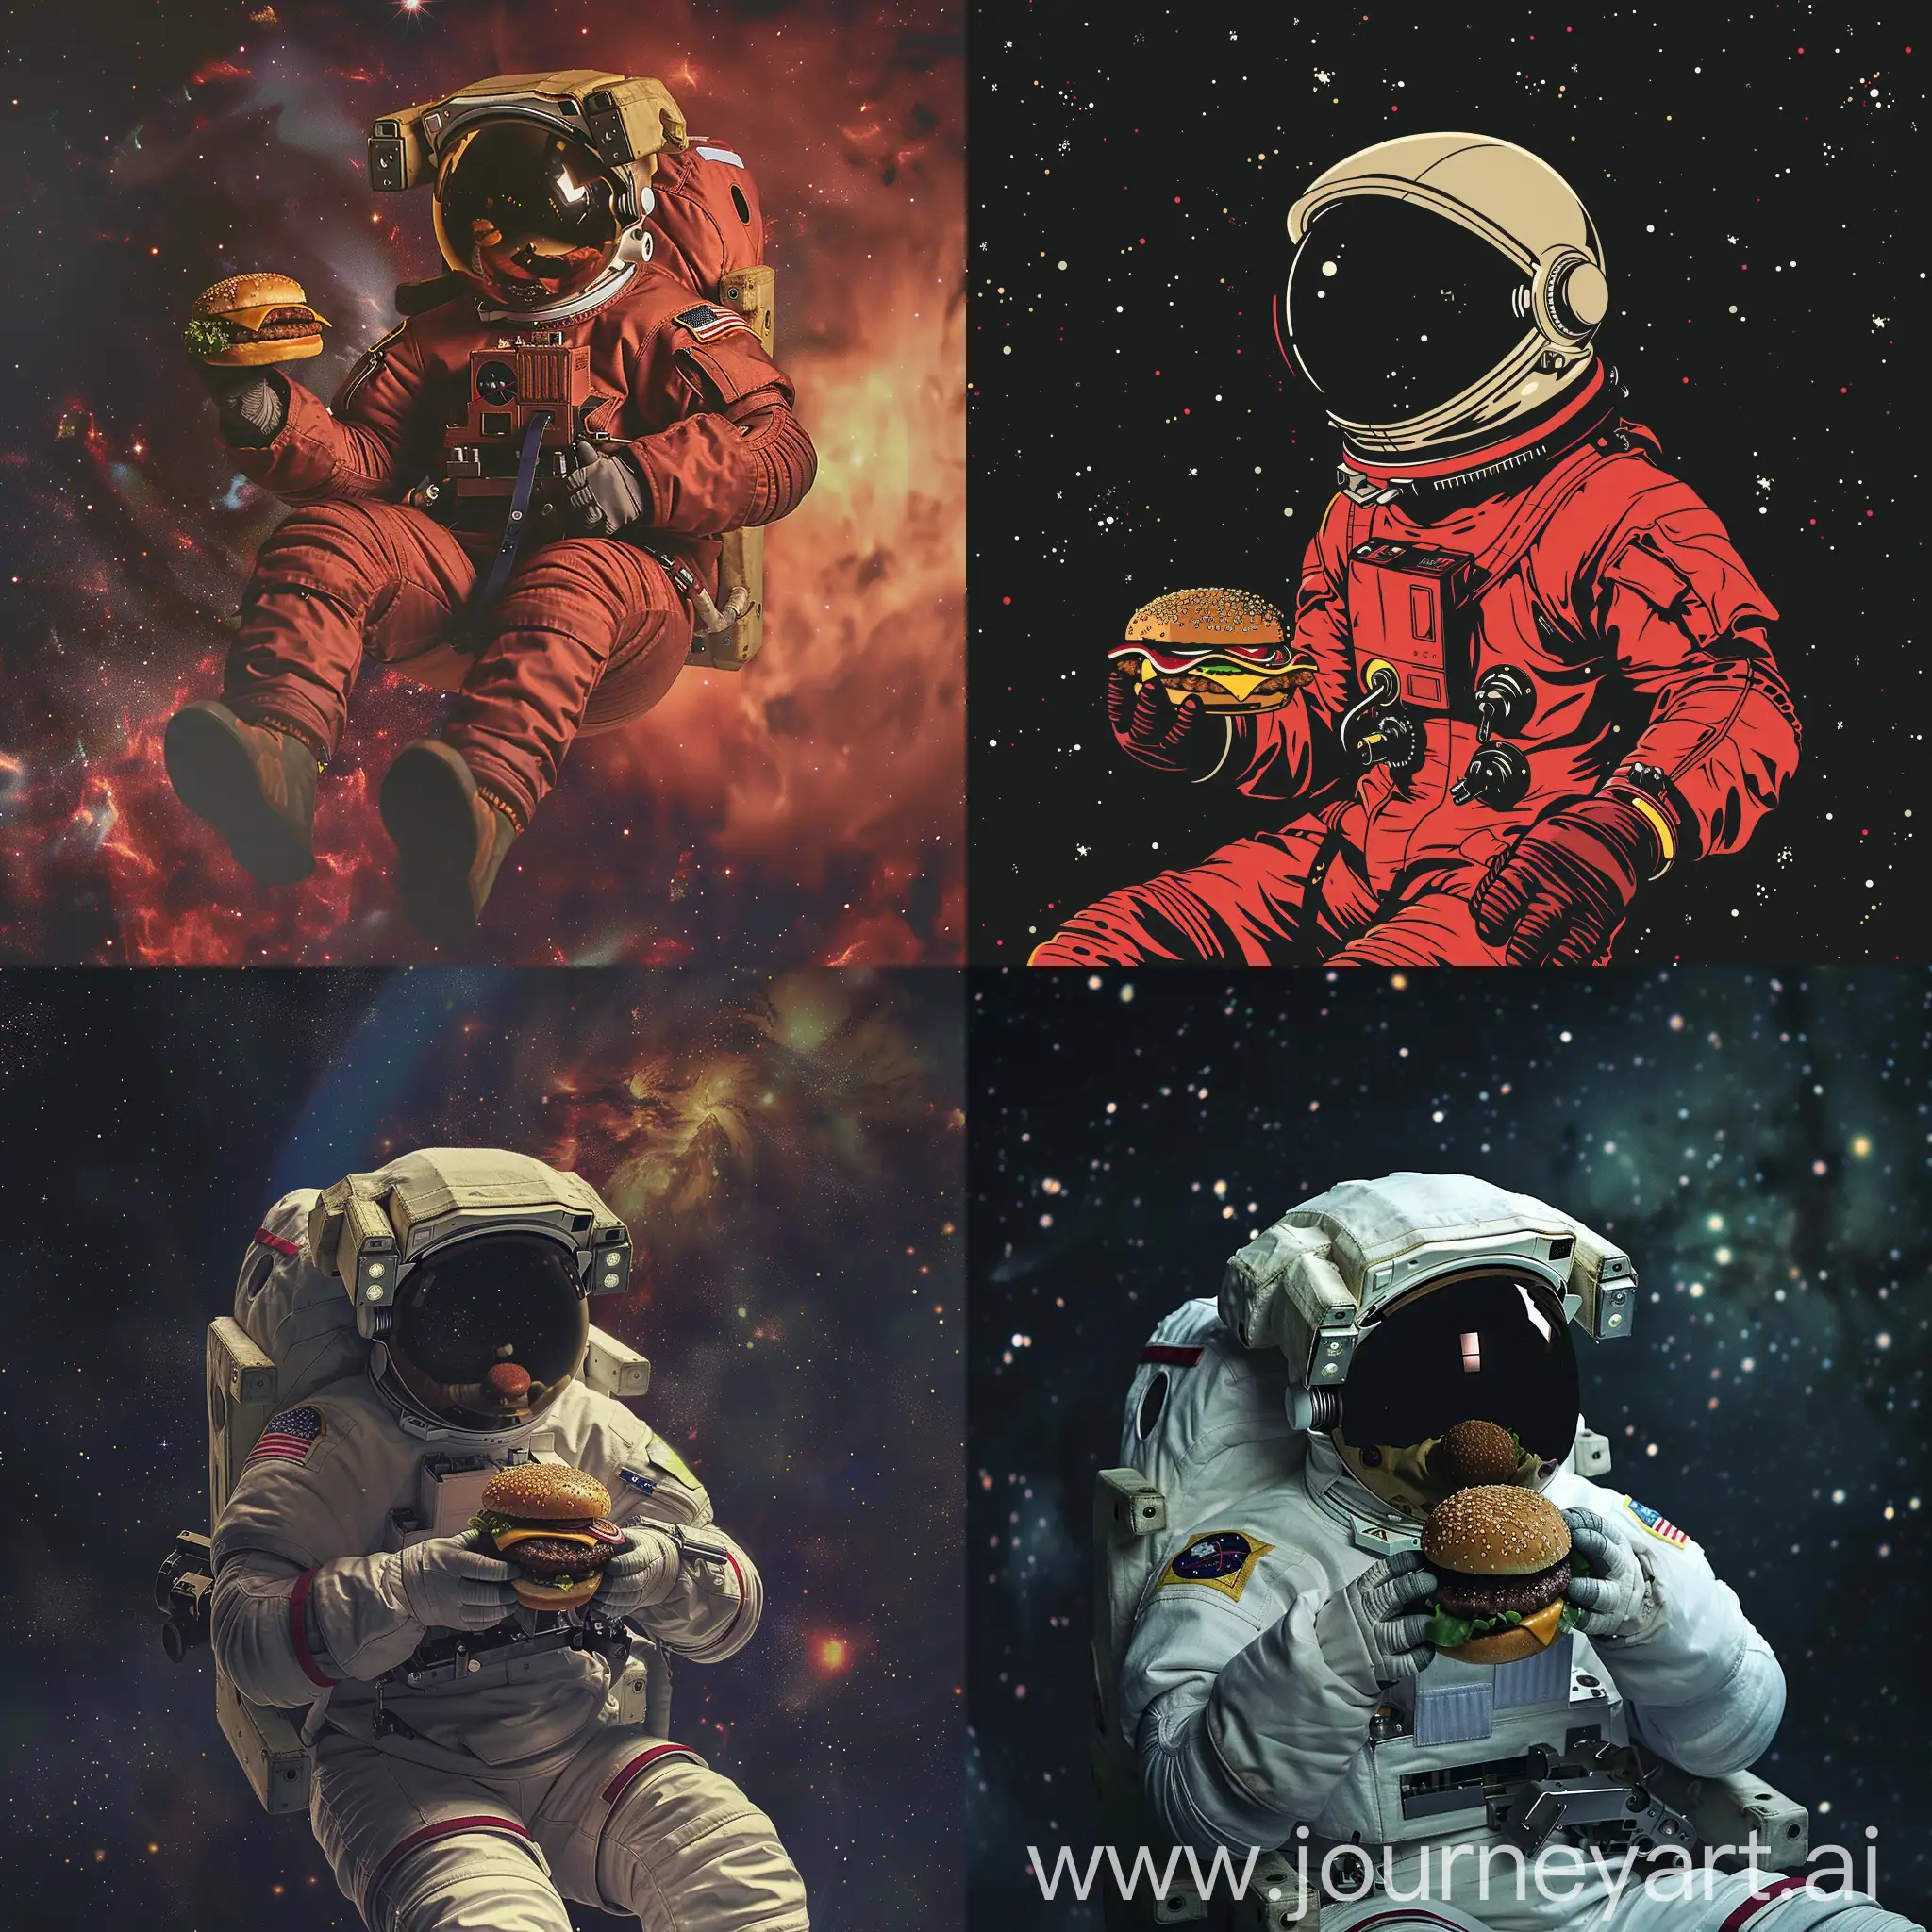 Twice in space eating a burger
